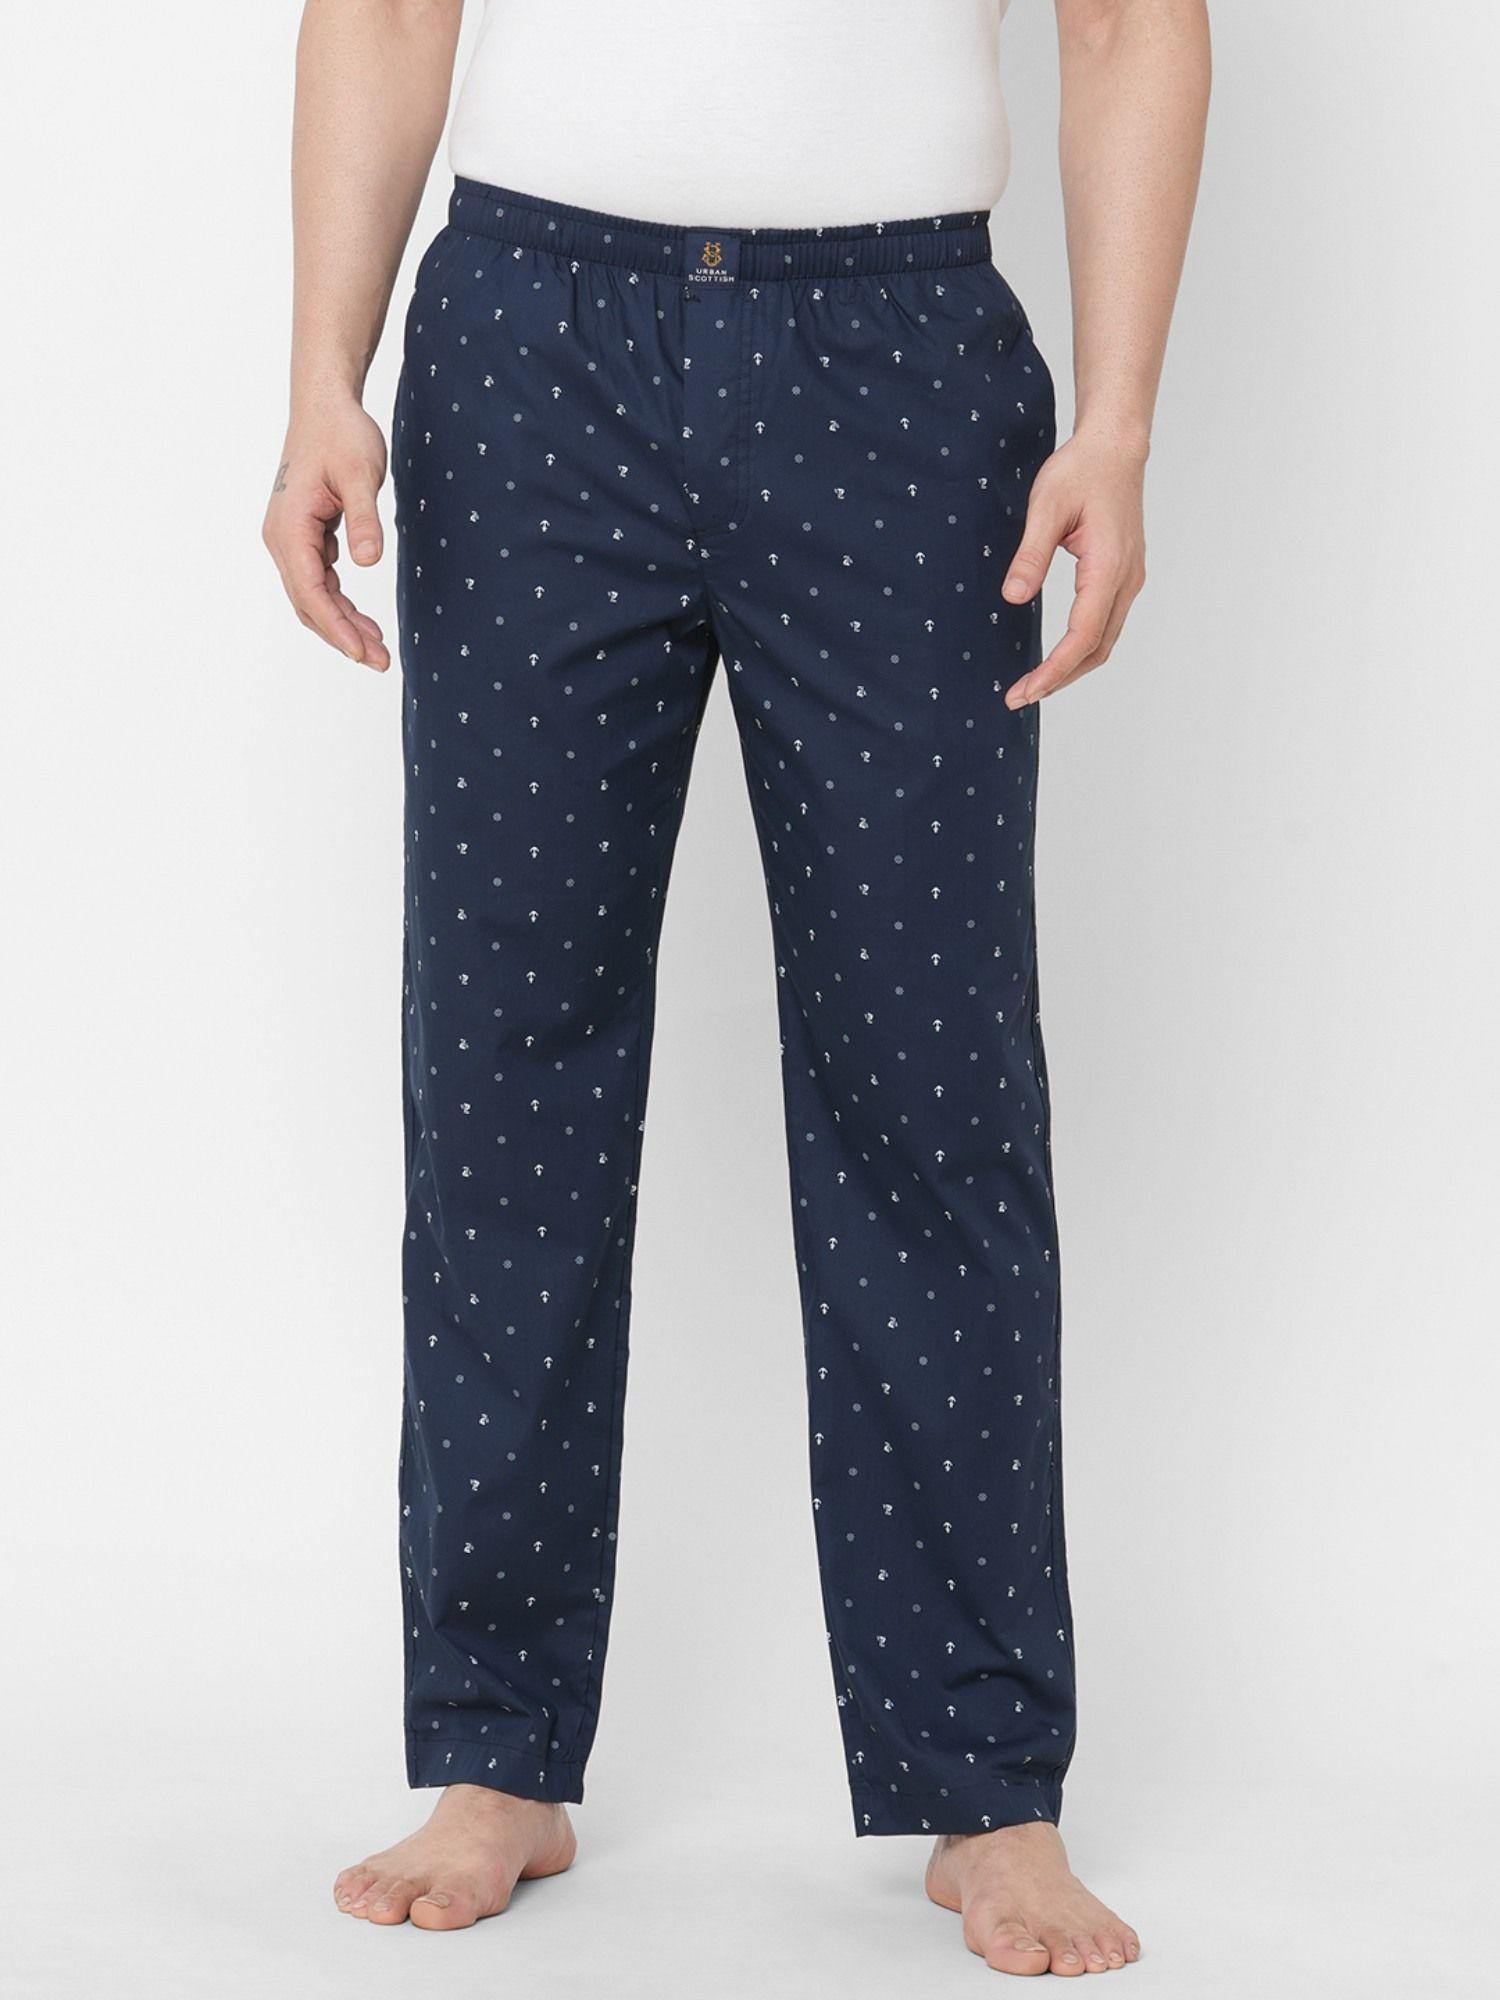 Mens Printed Woven Cotton Full Length Soft Pyjama With Pockets Navy Blue